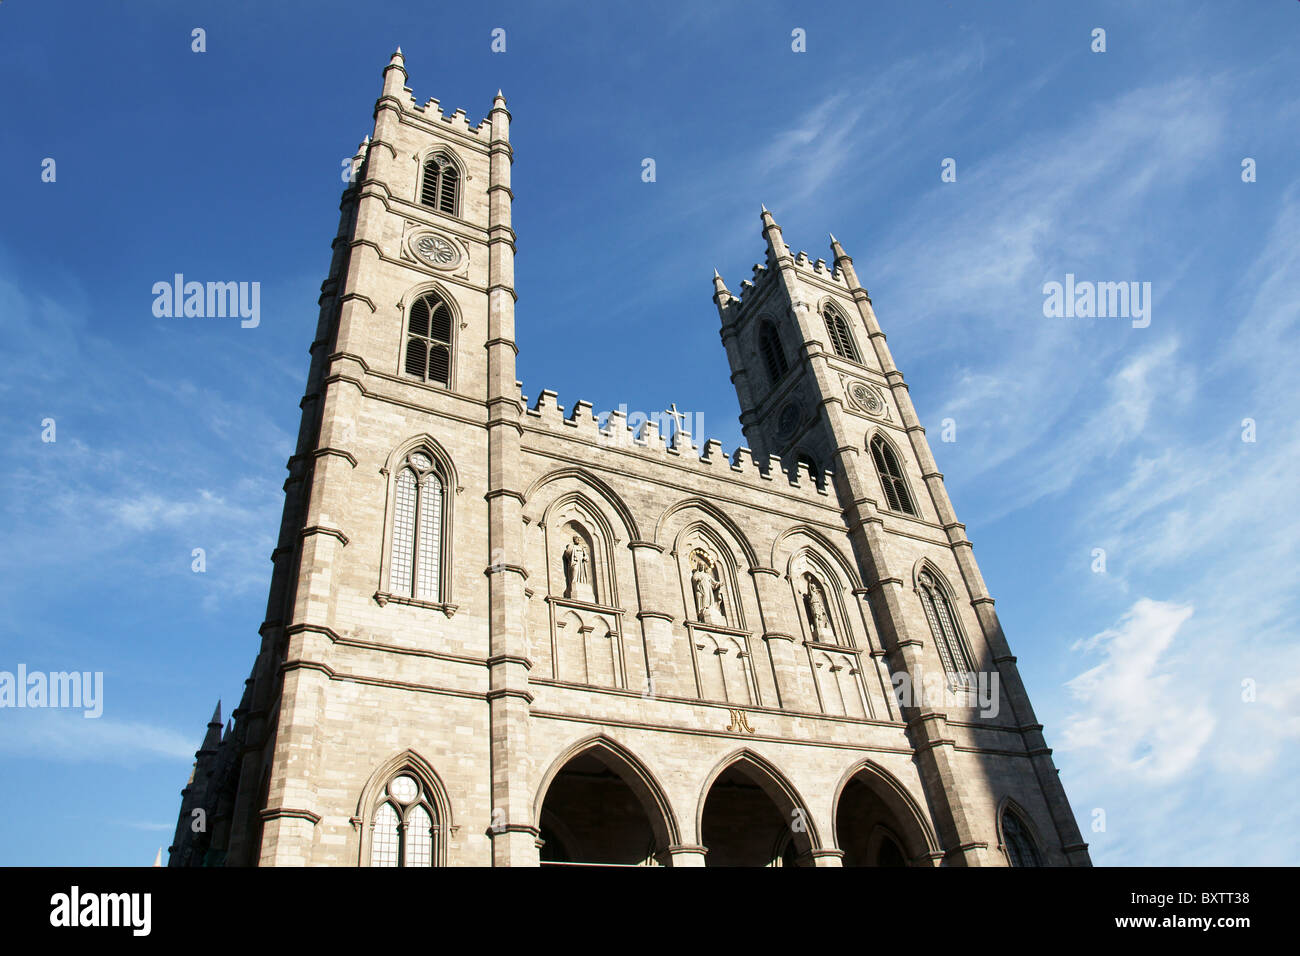 Perspective view of an old gothic style cathedral christian catholic church Stock Photo